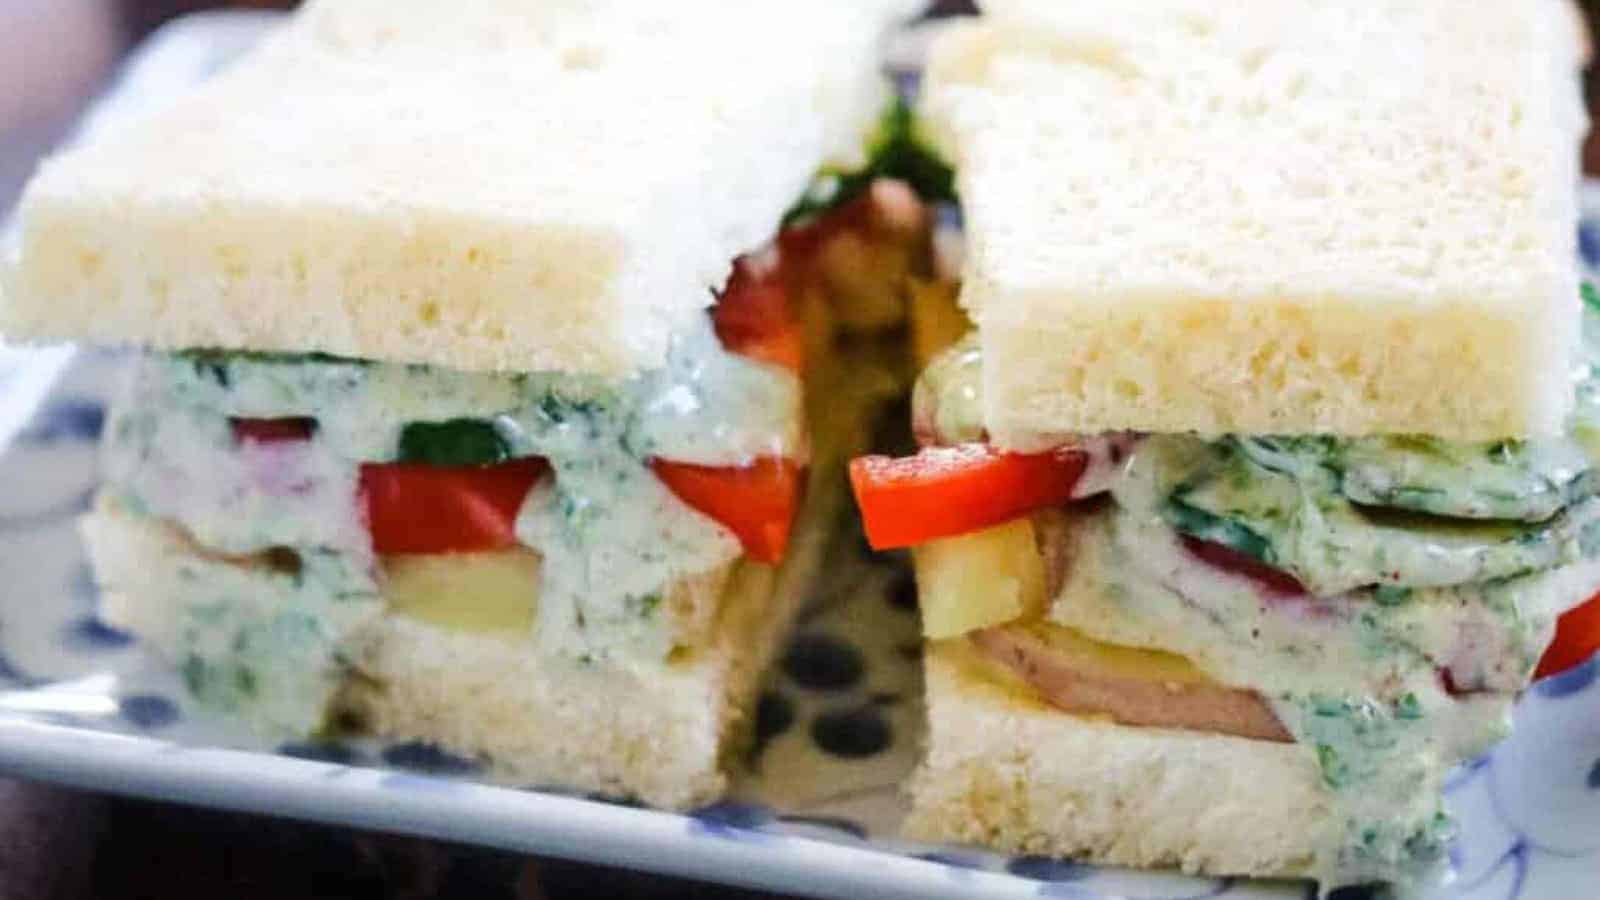 Bombay Sandwiches layered with potato, tomato, cucumbers, and an herb chutney sauce.